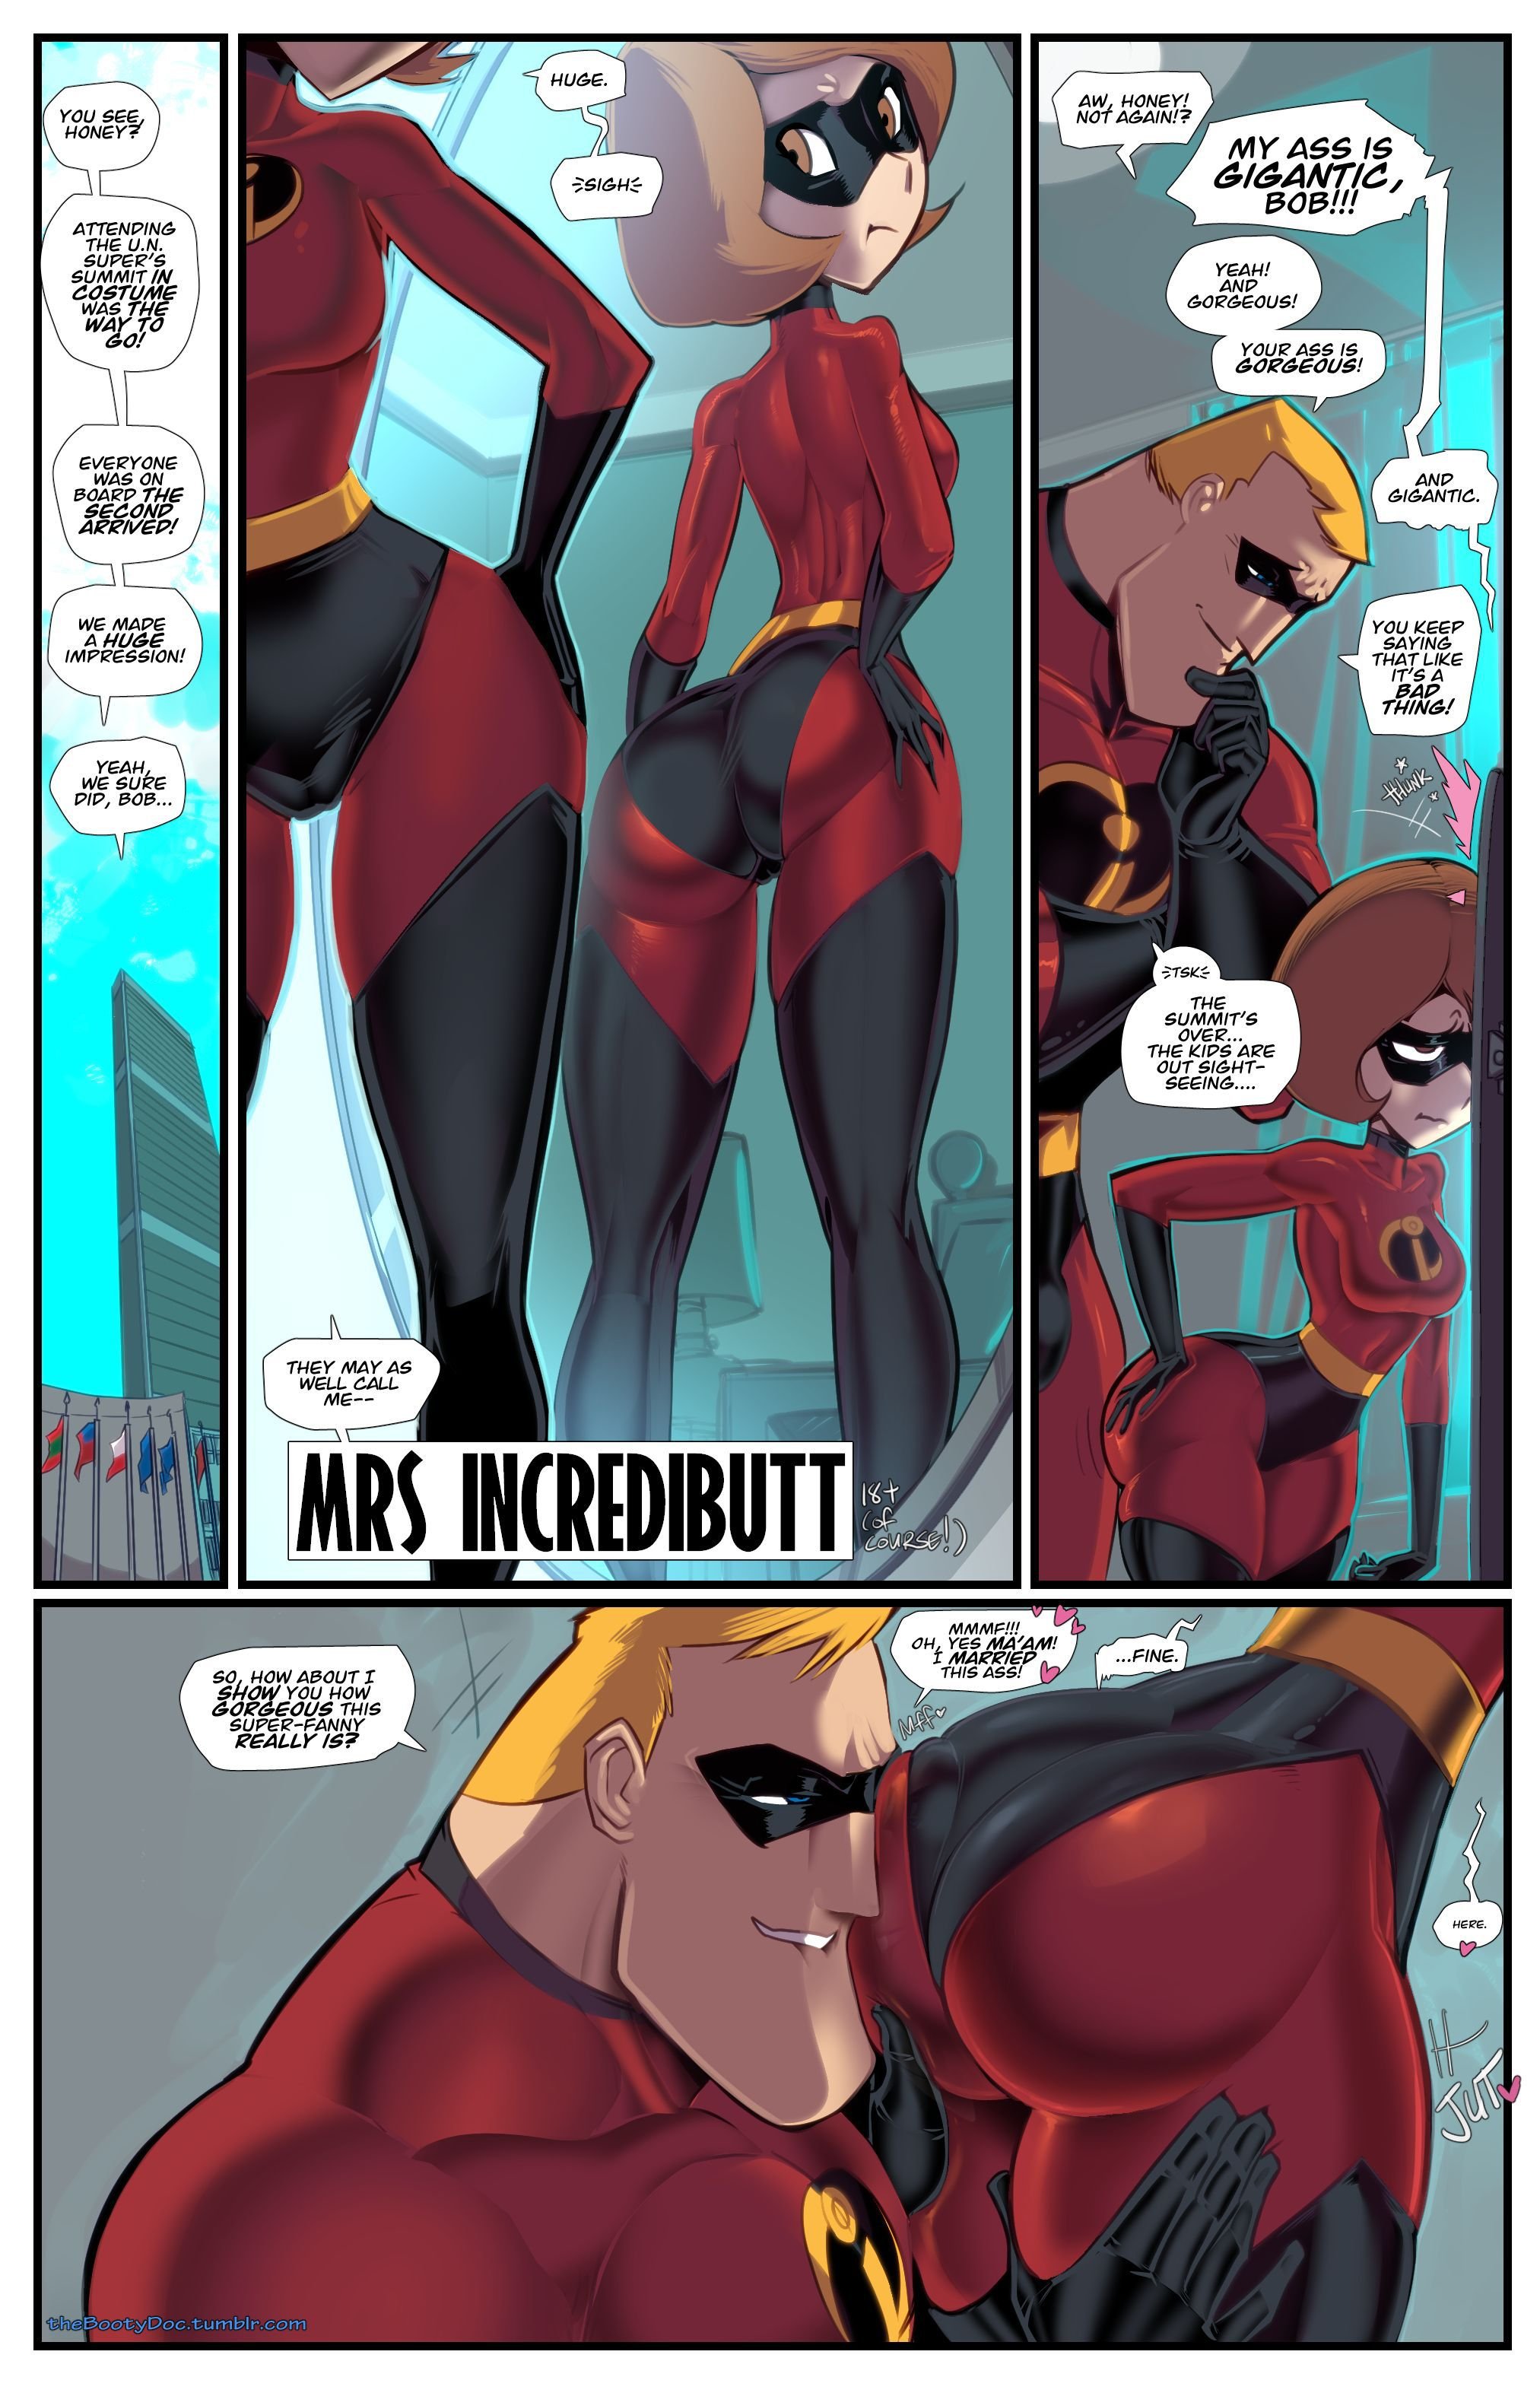 The Incredibles Gay Porn - Mrs. Incredibutt (The Incredibles) [Fred Perry] - 1 . Mrs. Incredibutt -  Chapter 1 (The Incredibles) [Fred Perry] - AllPornComic